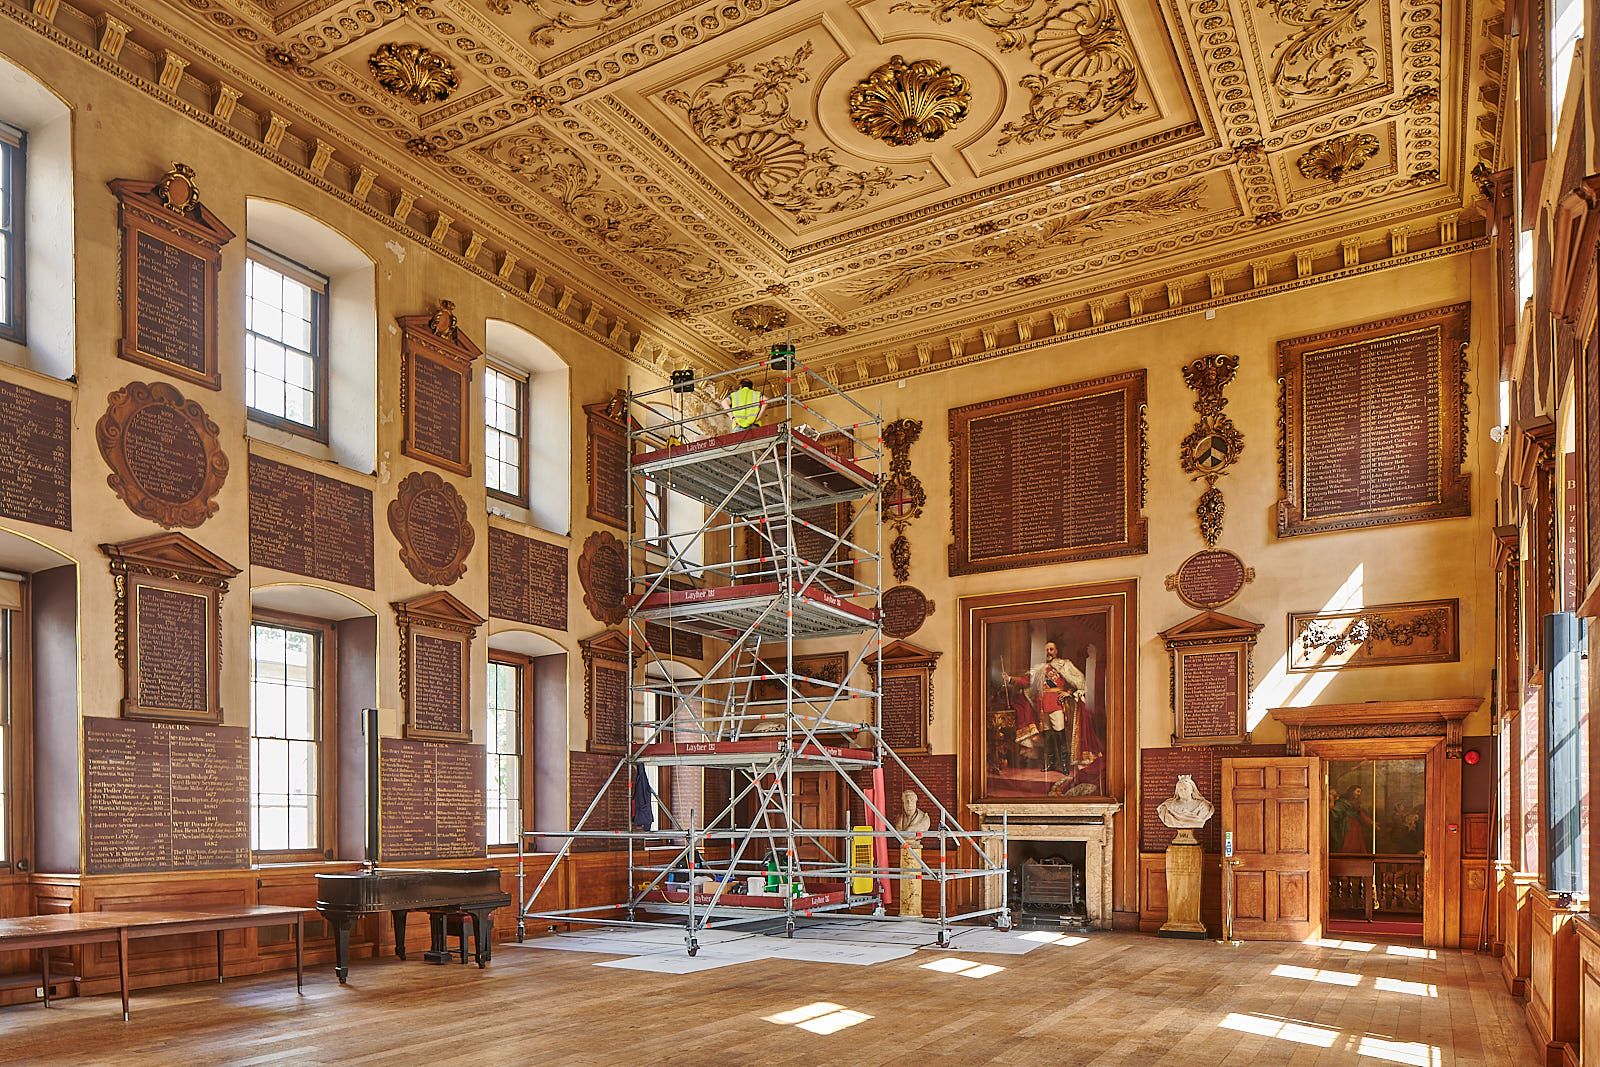 Scaffolding in the Great Hall for preliminary inspection